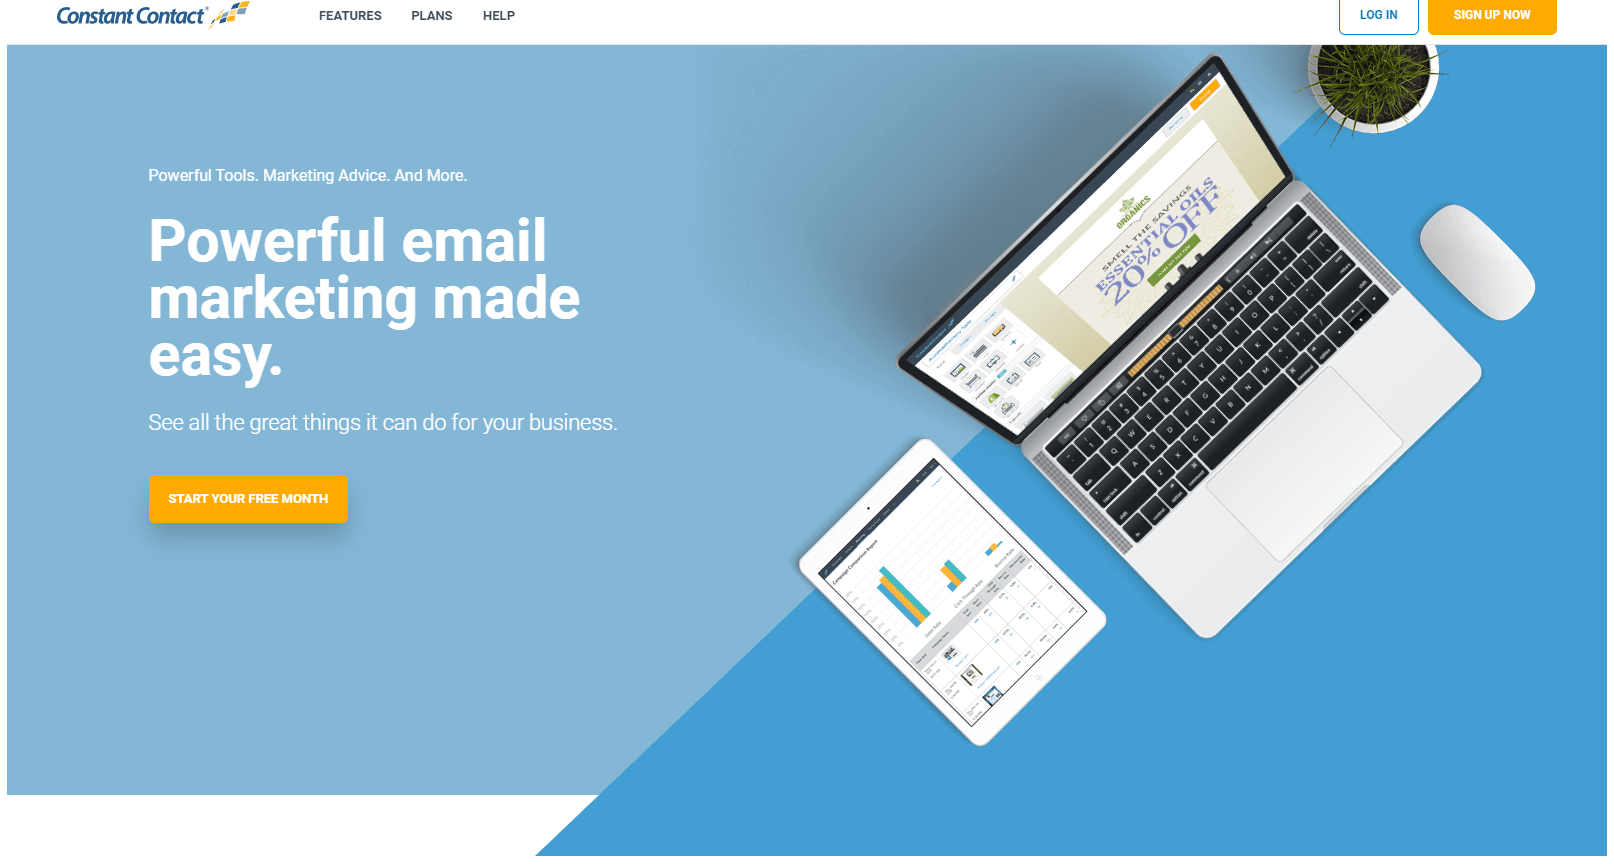 ConstantContact is one of the best MailChimp alternatives